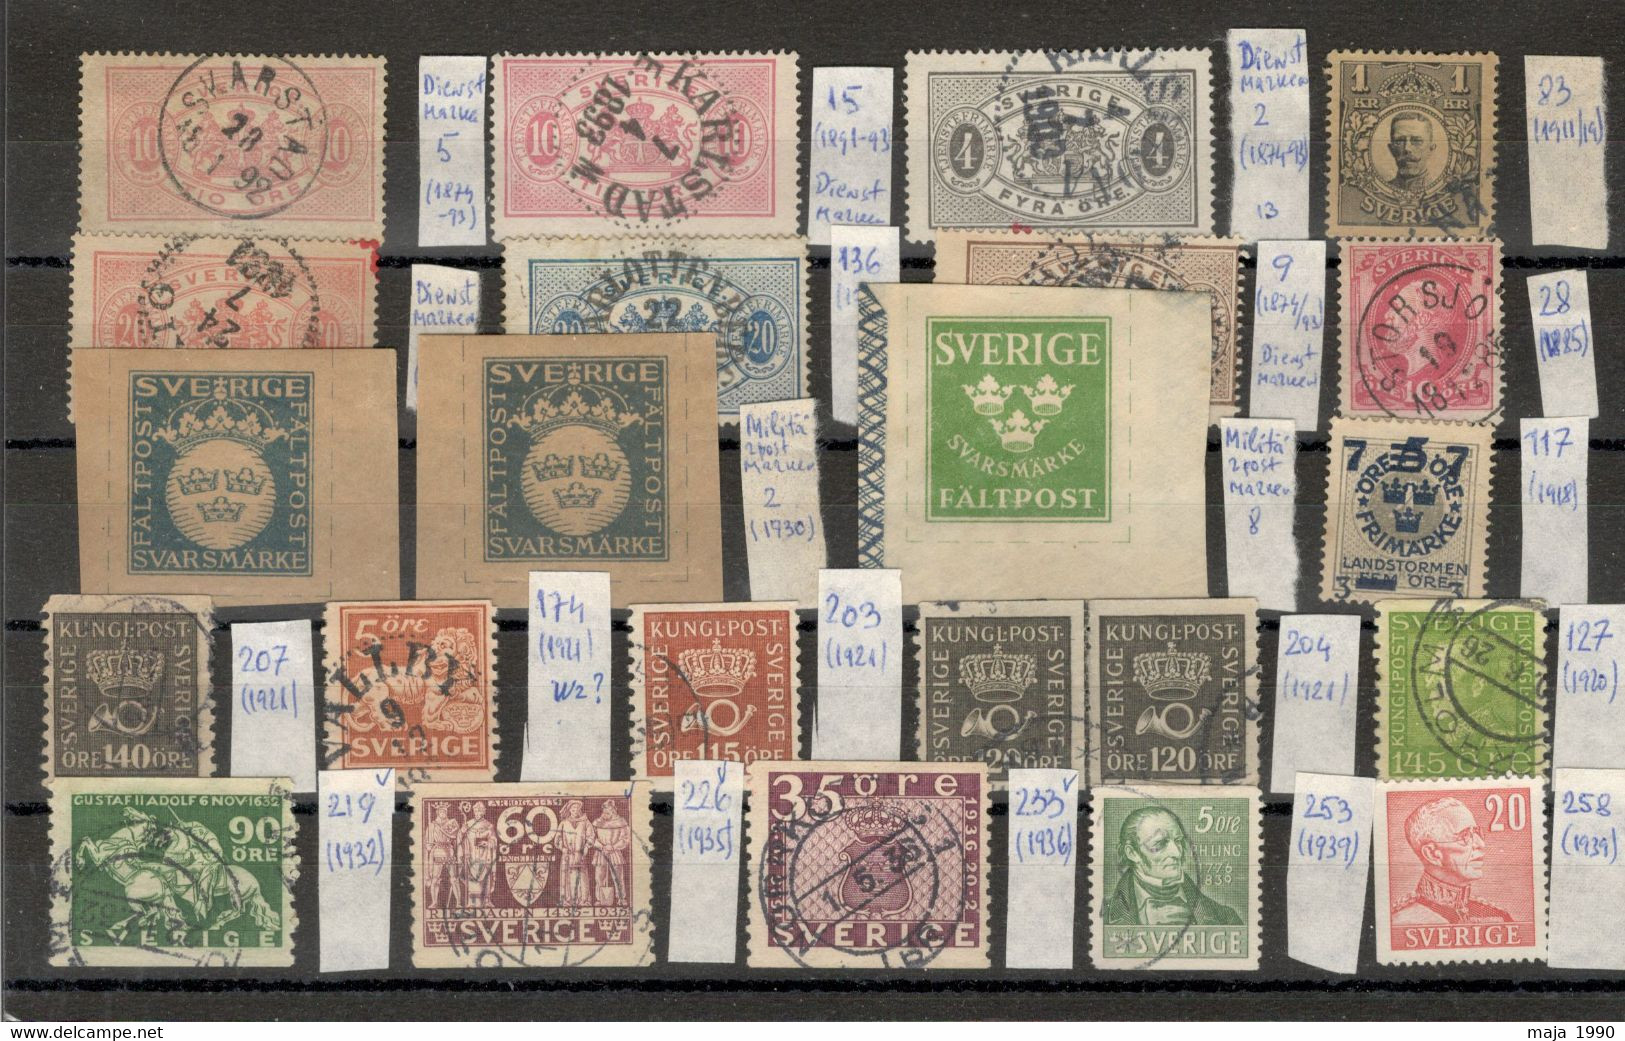 SWEDEN - NICE LOT USED STAMPS ON TWO CARTONS - Sammlungen